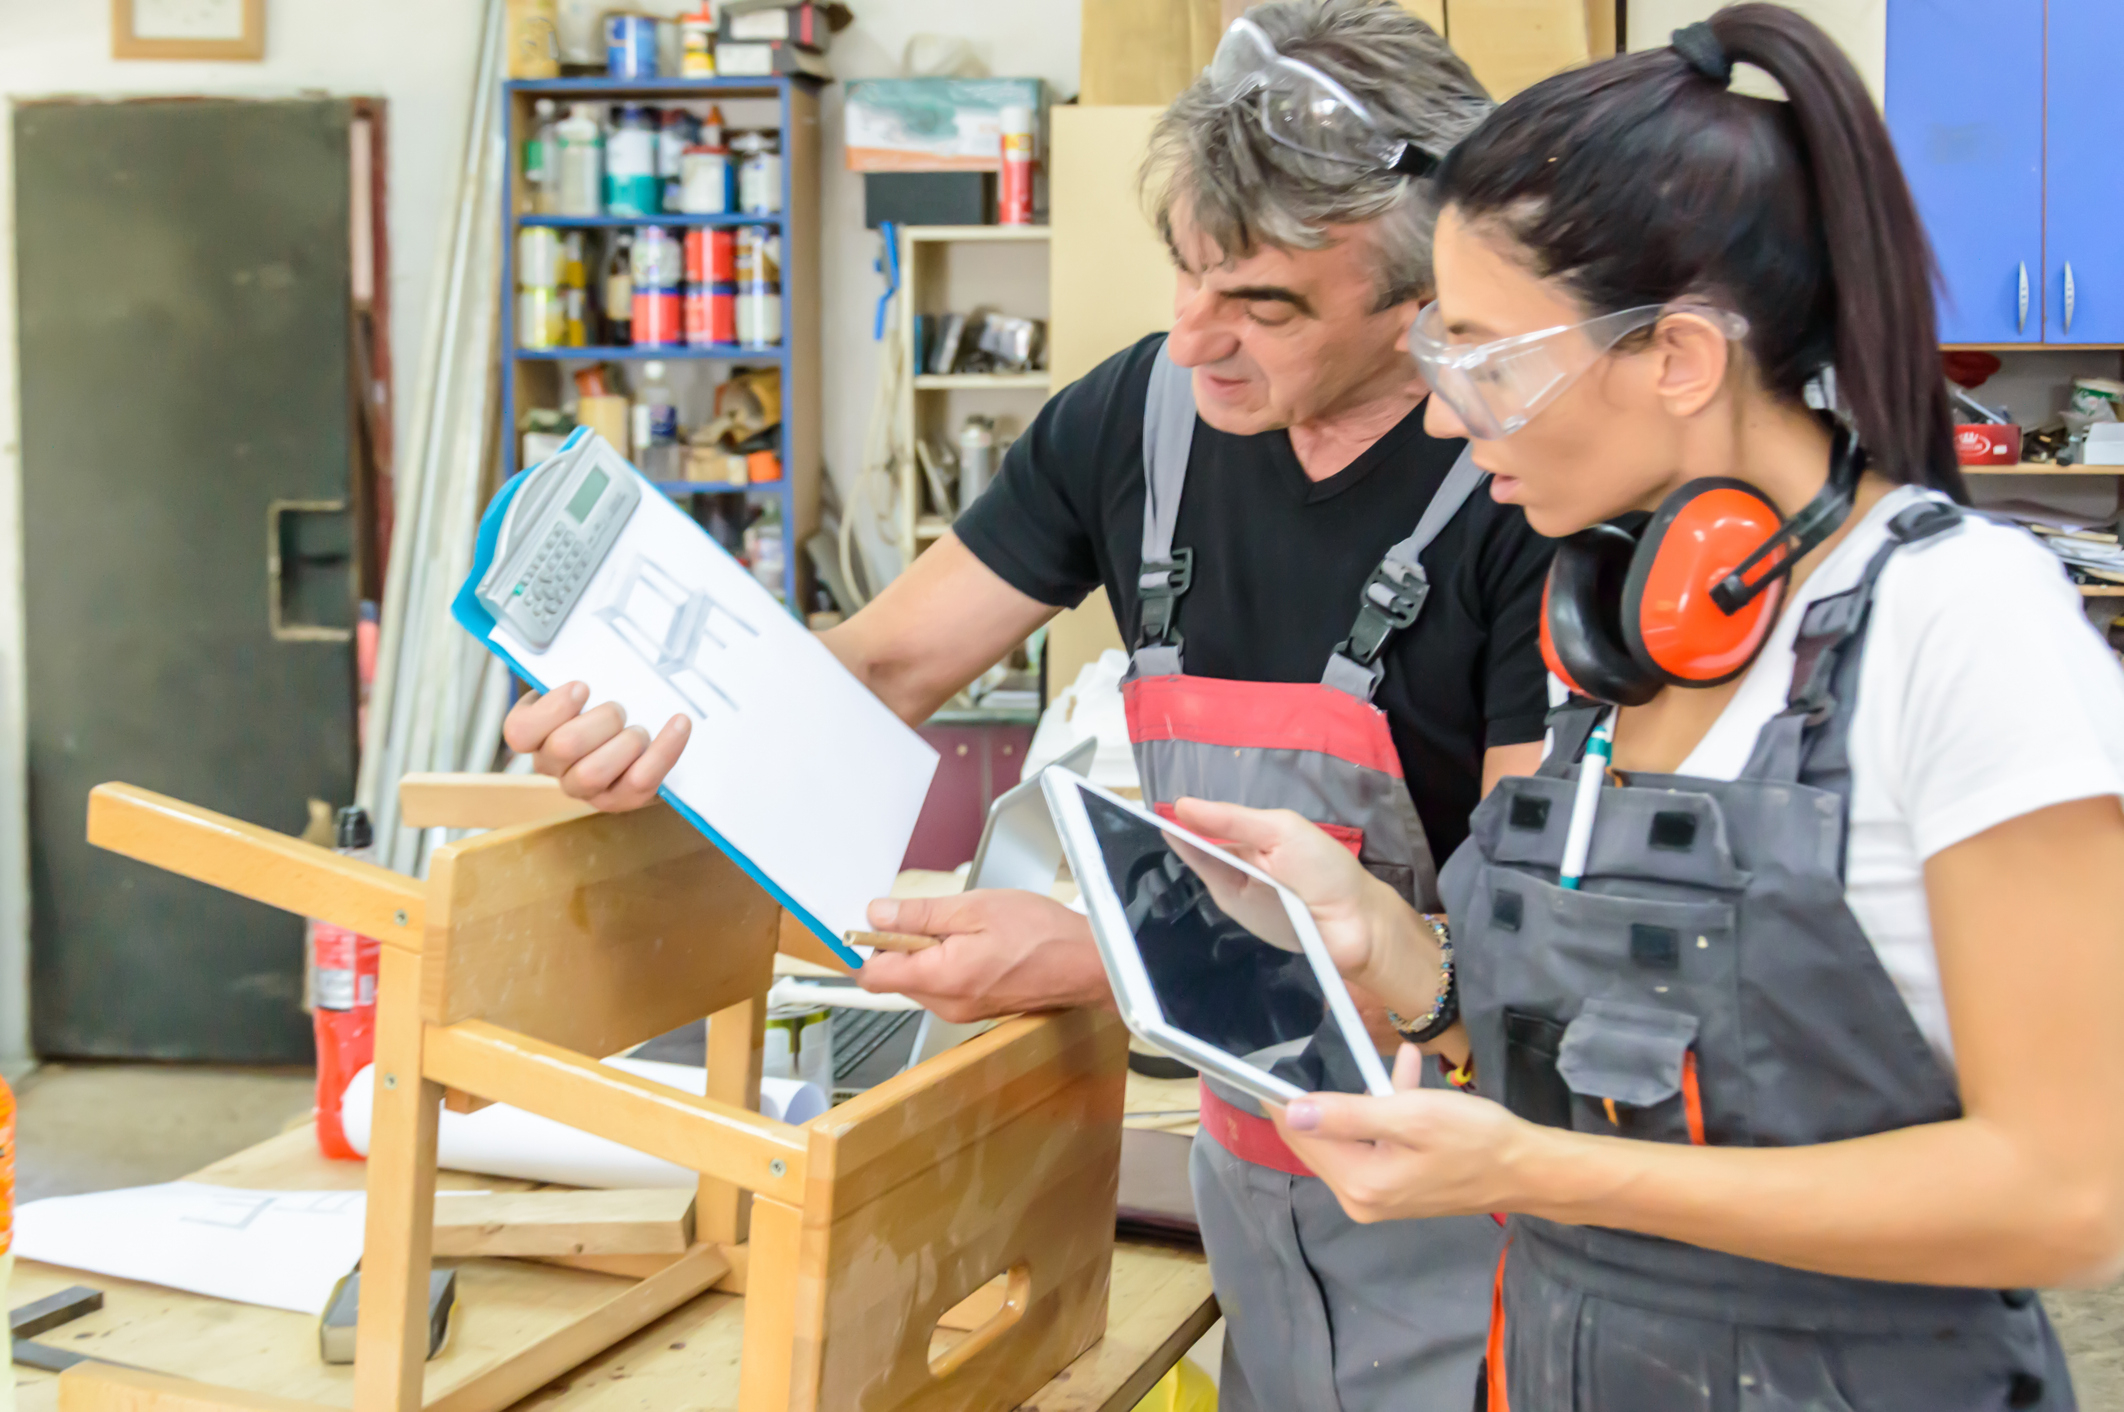 Two carpenters, one holding plans, discuss work at a woodworking bench